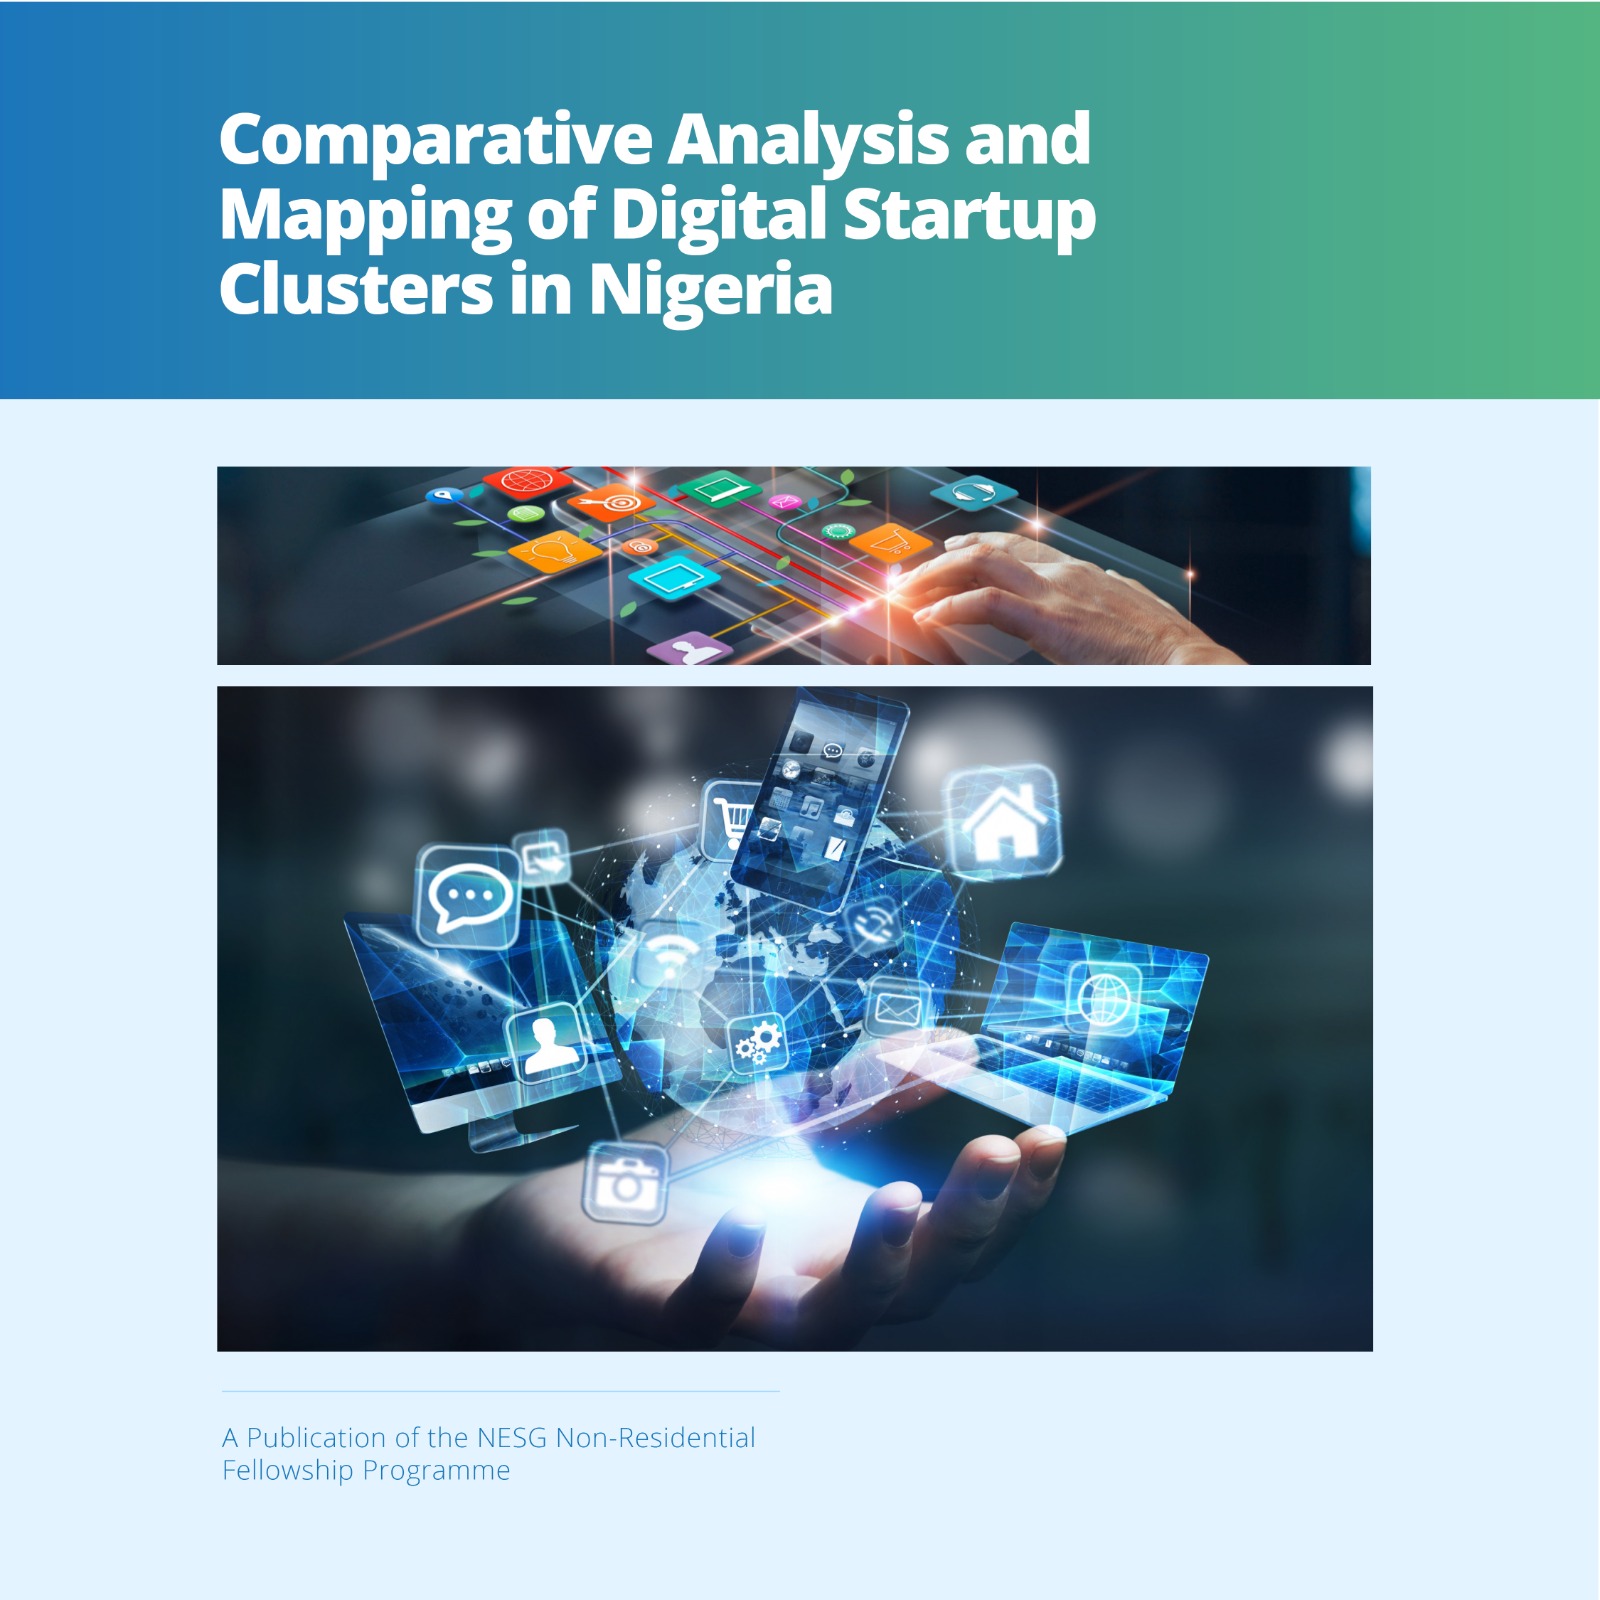 Comparative Analysis And Mapping of Digital Startup Clusters in Nigeria